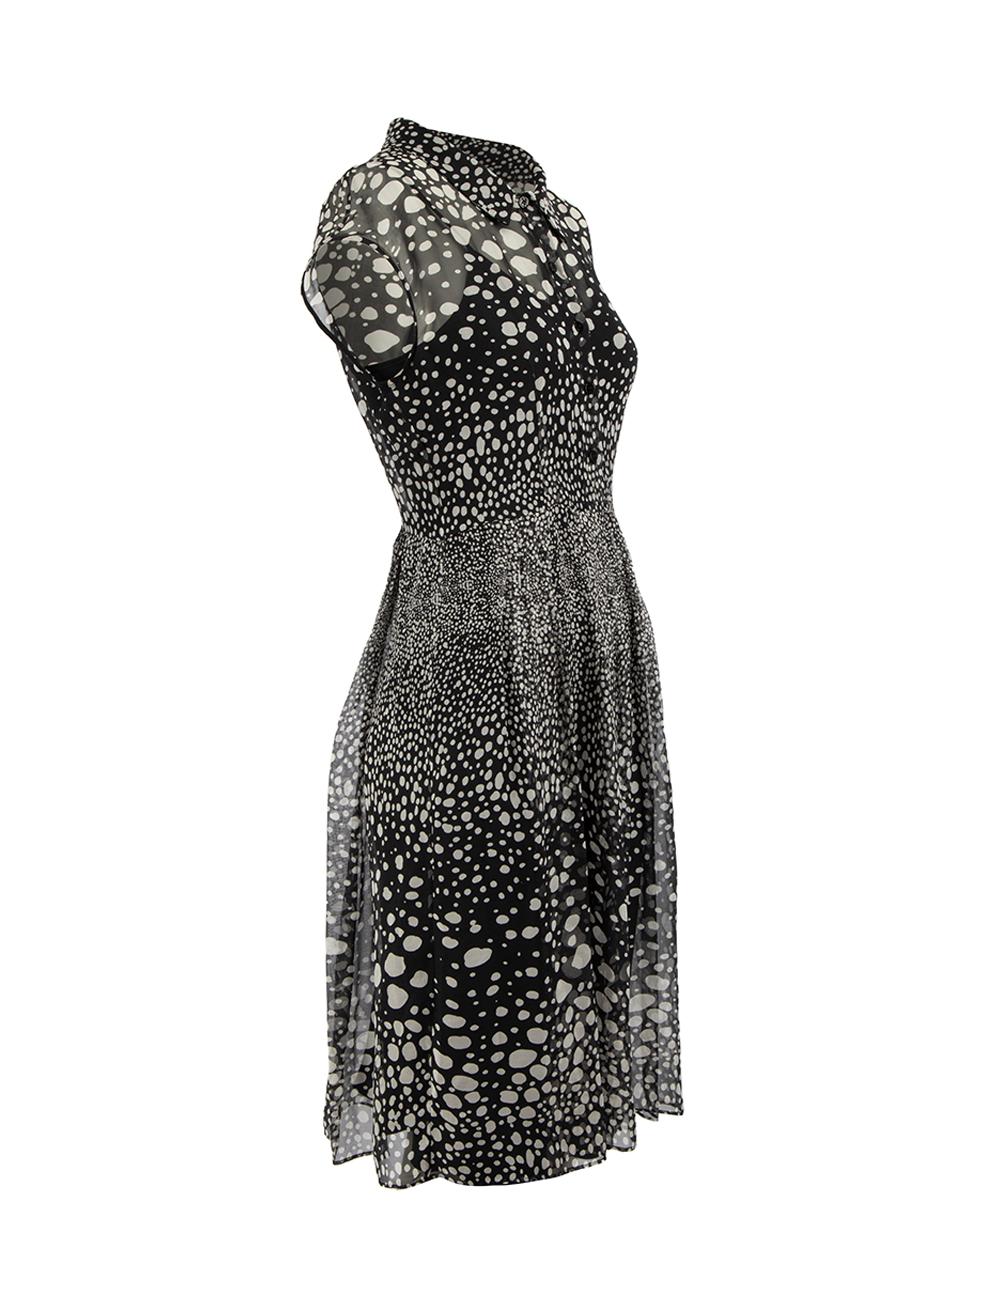 CONDITION is Good. Minor wear to dress is evident. Light wear to fabric with a number of small pulls to the weave seen at the neck and through the back of this used Max Mara Studio designer resale item.
 
Details
Black
Silk
Dress
White spotted